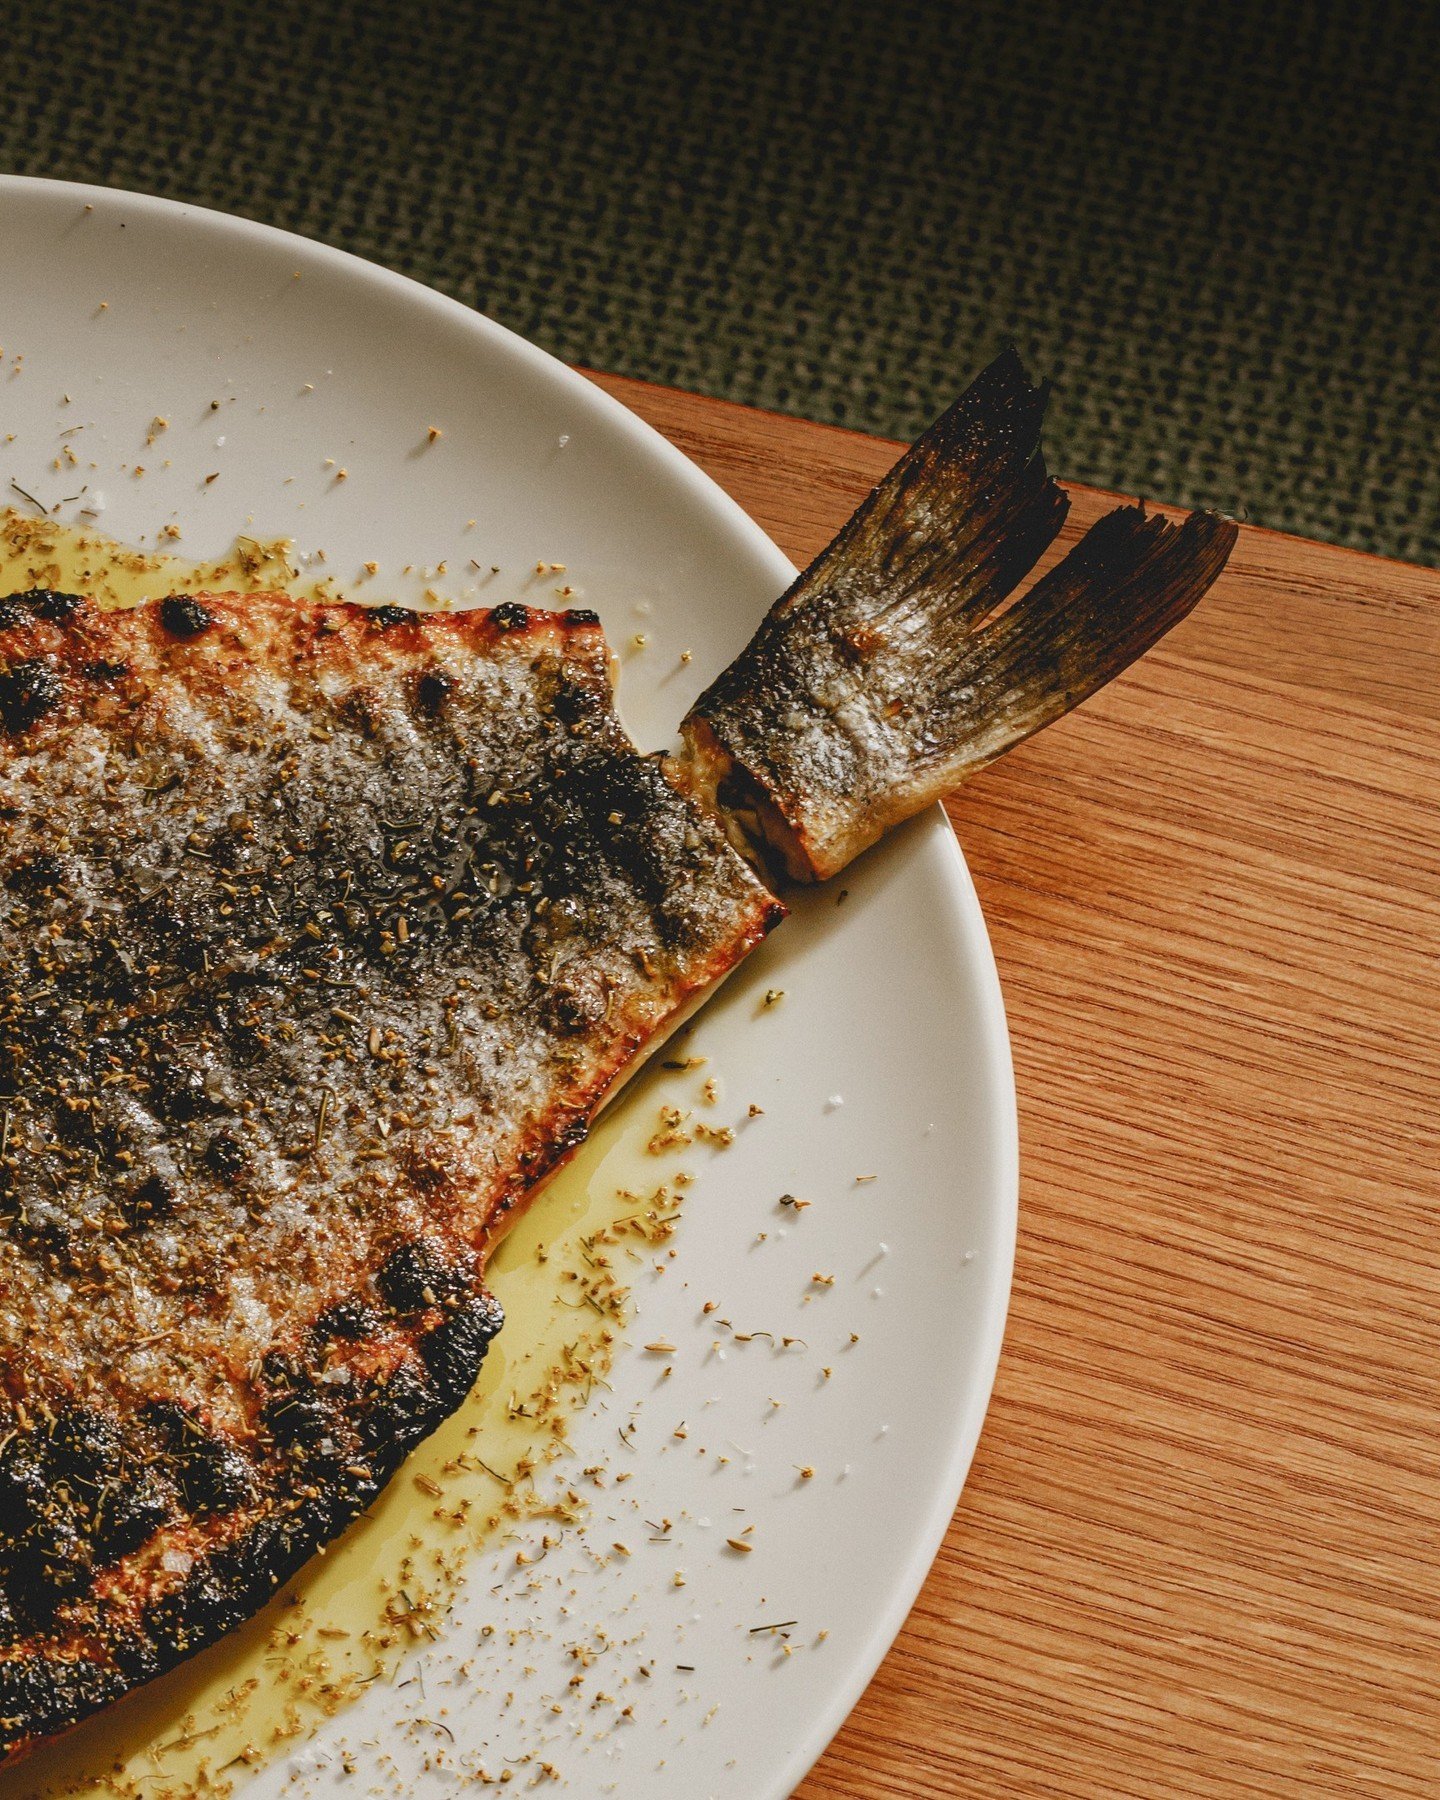 The branzino &amp; the butterfly&hellip;
A tale of water &amp; air. 
Whole roasted butterflied branzino, with Meyer lemon and artichoke tapenade. 
🌞
🌞
🌞
🌞
🌞
*no actual 🦋